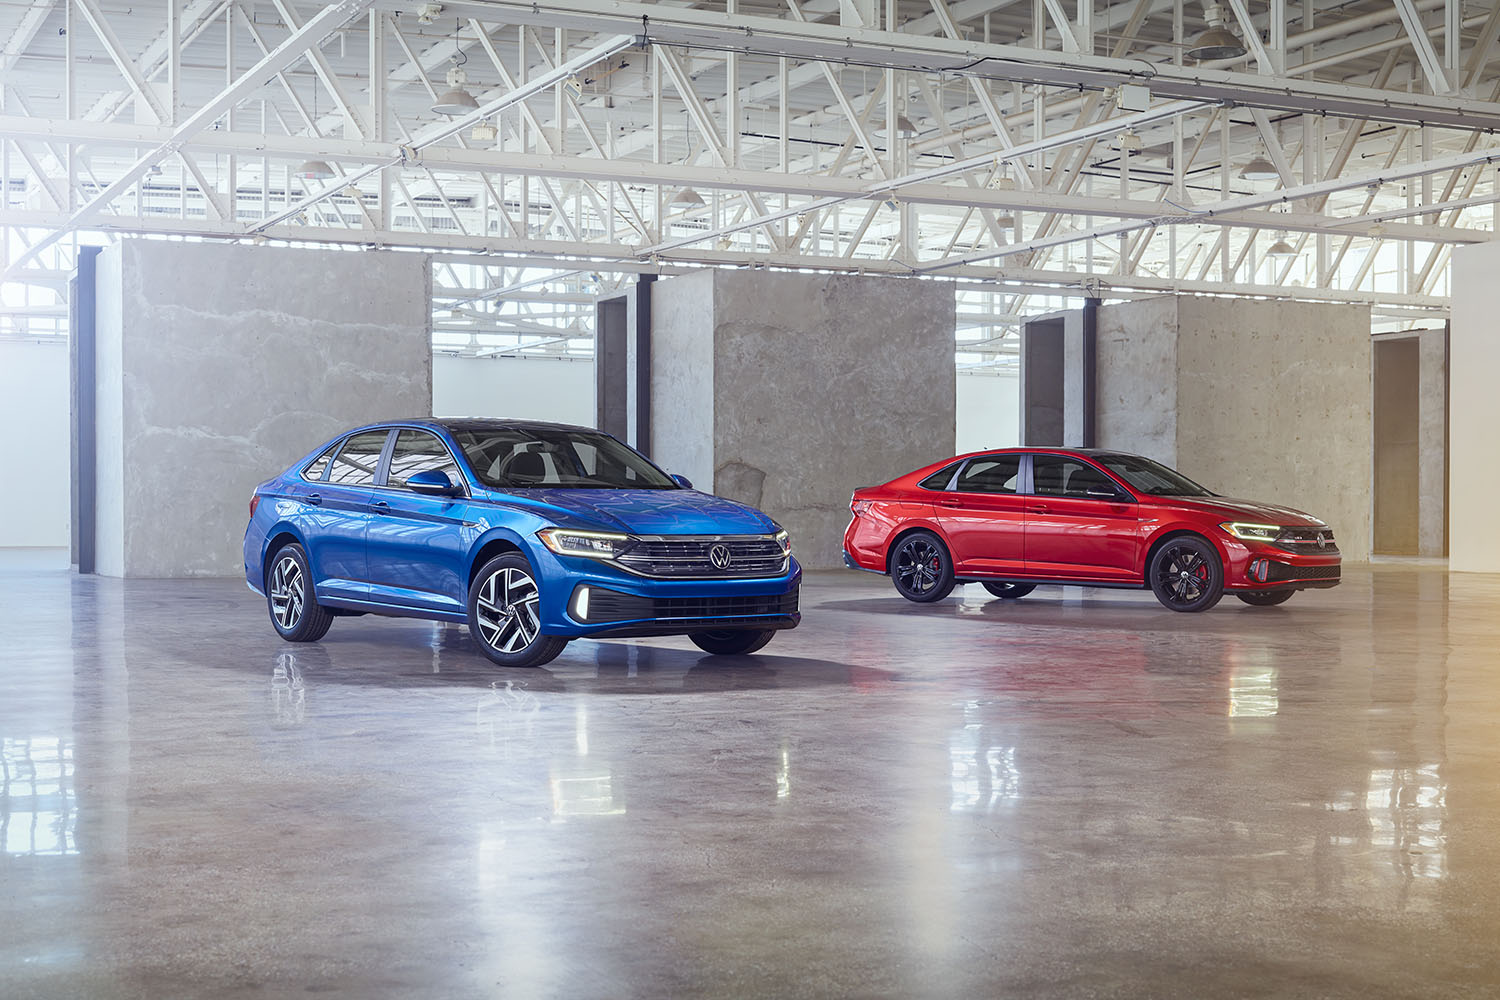 2023 Volkswagen Jetta in blue and Jetta GLI in red parked inside a building with a museum gallery-like interior